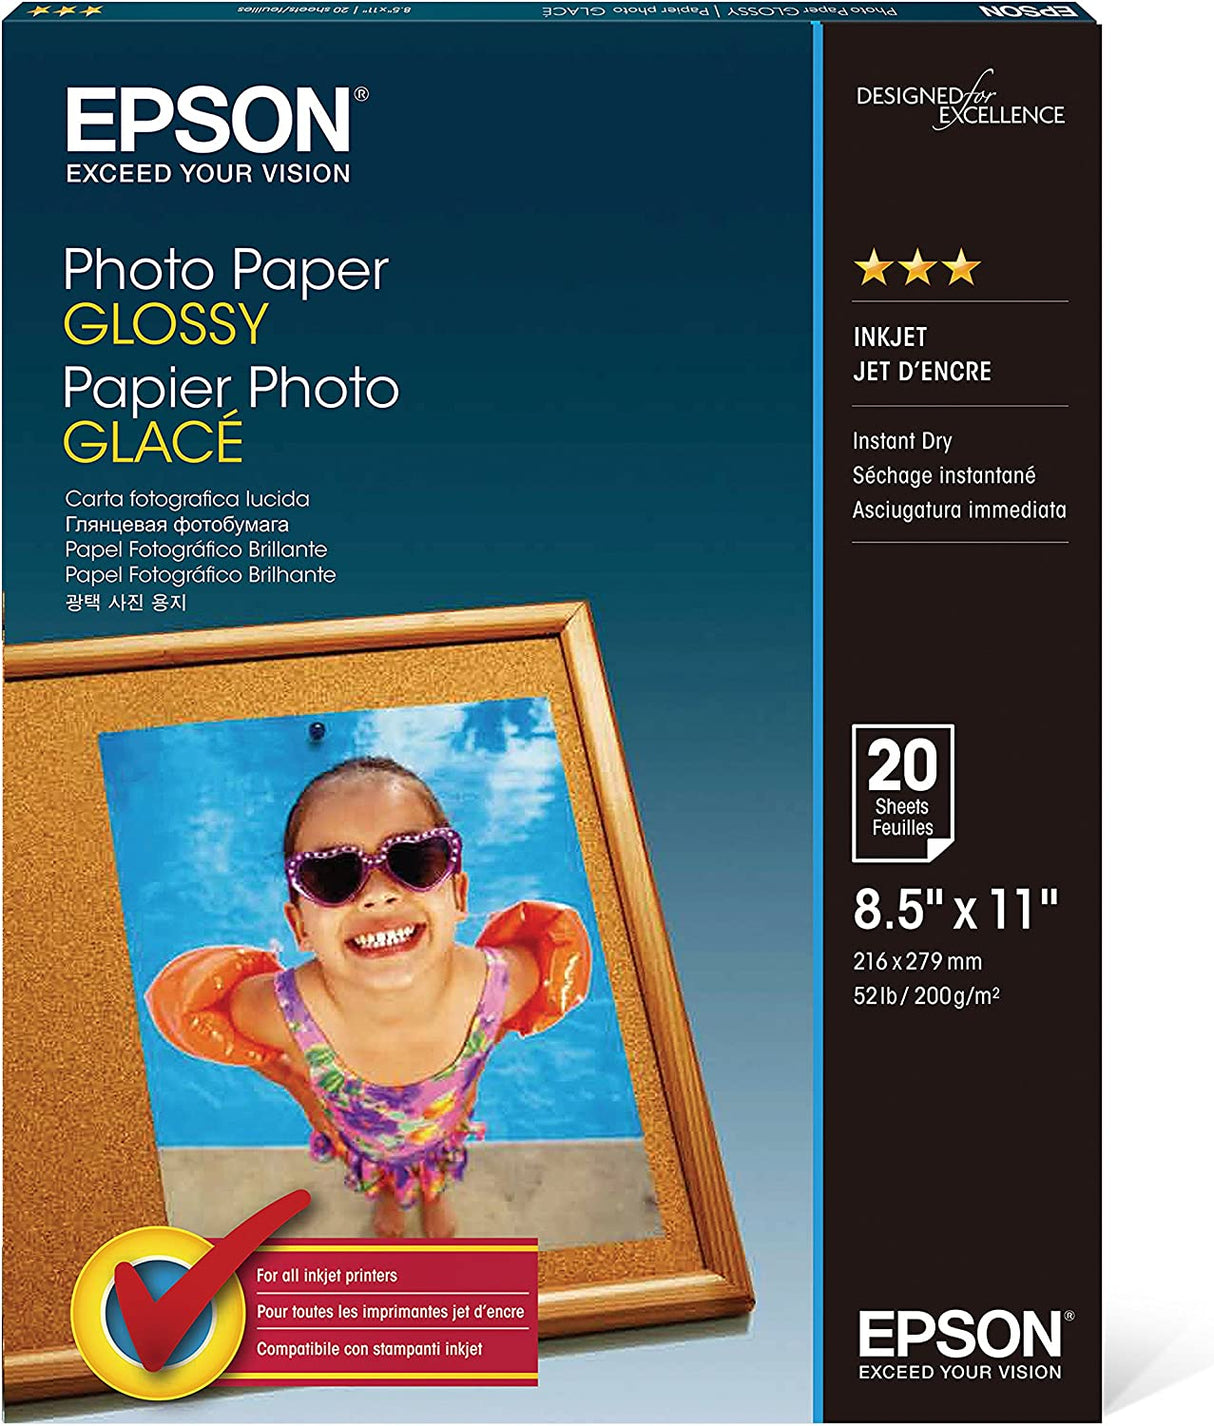 Epson Glossy Photo Paper, 8.5 x 11 Inches, 20 Sheets per Pack (S041141)